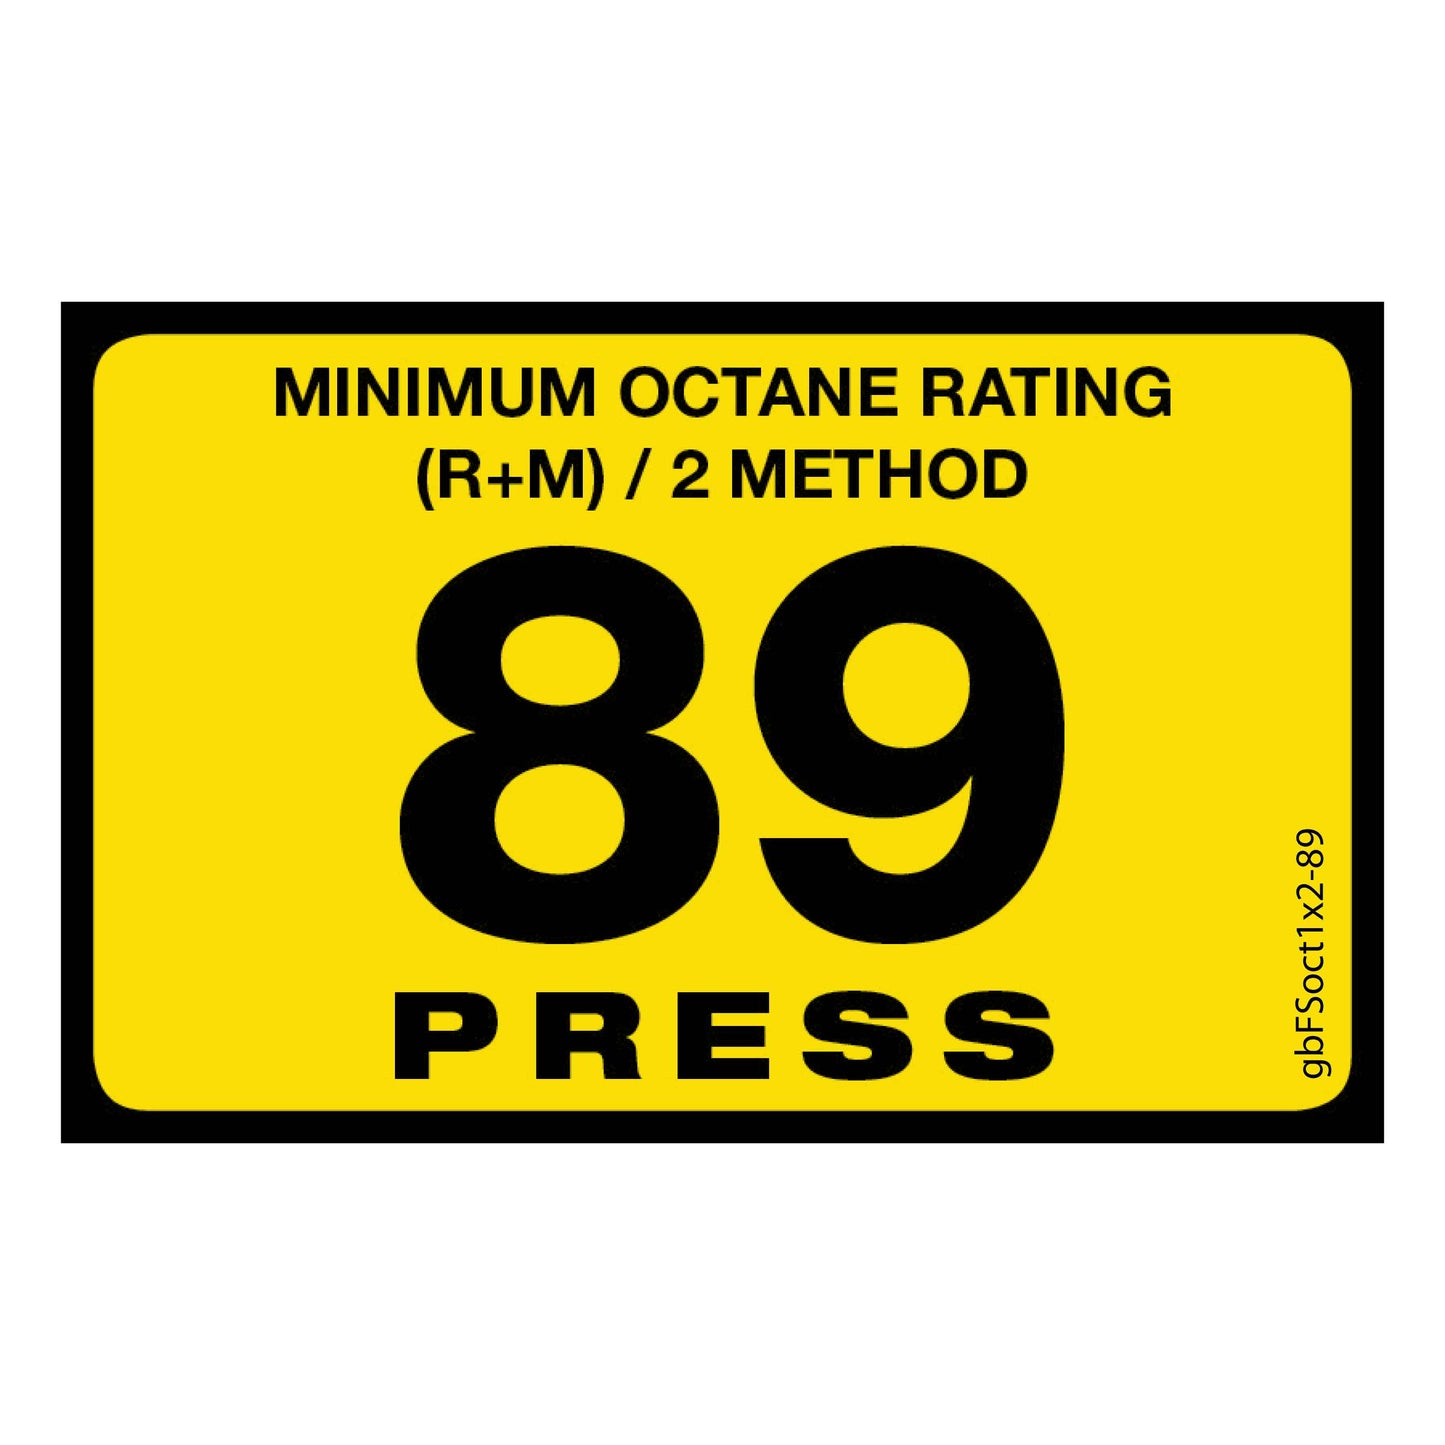 89 Press Octane Rating Decal. 1 inch by 2 inches in size. 